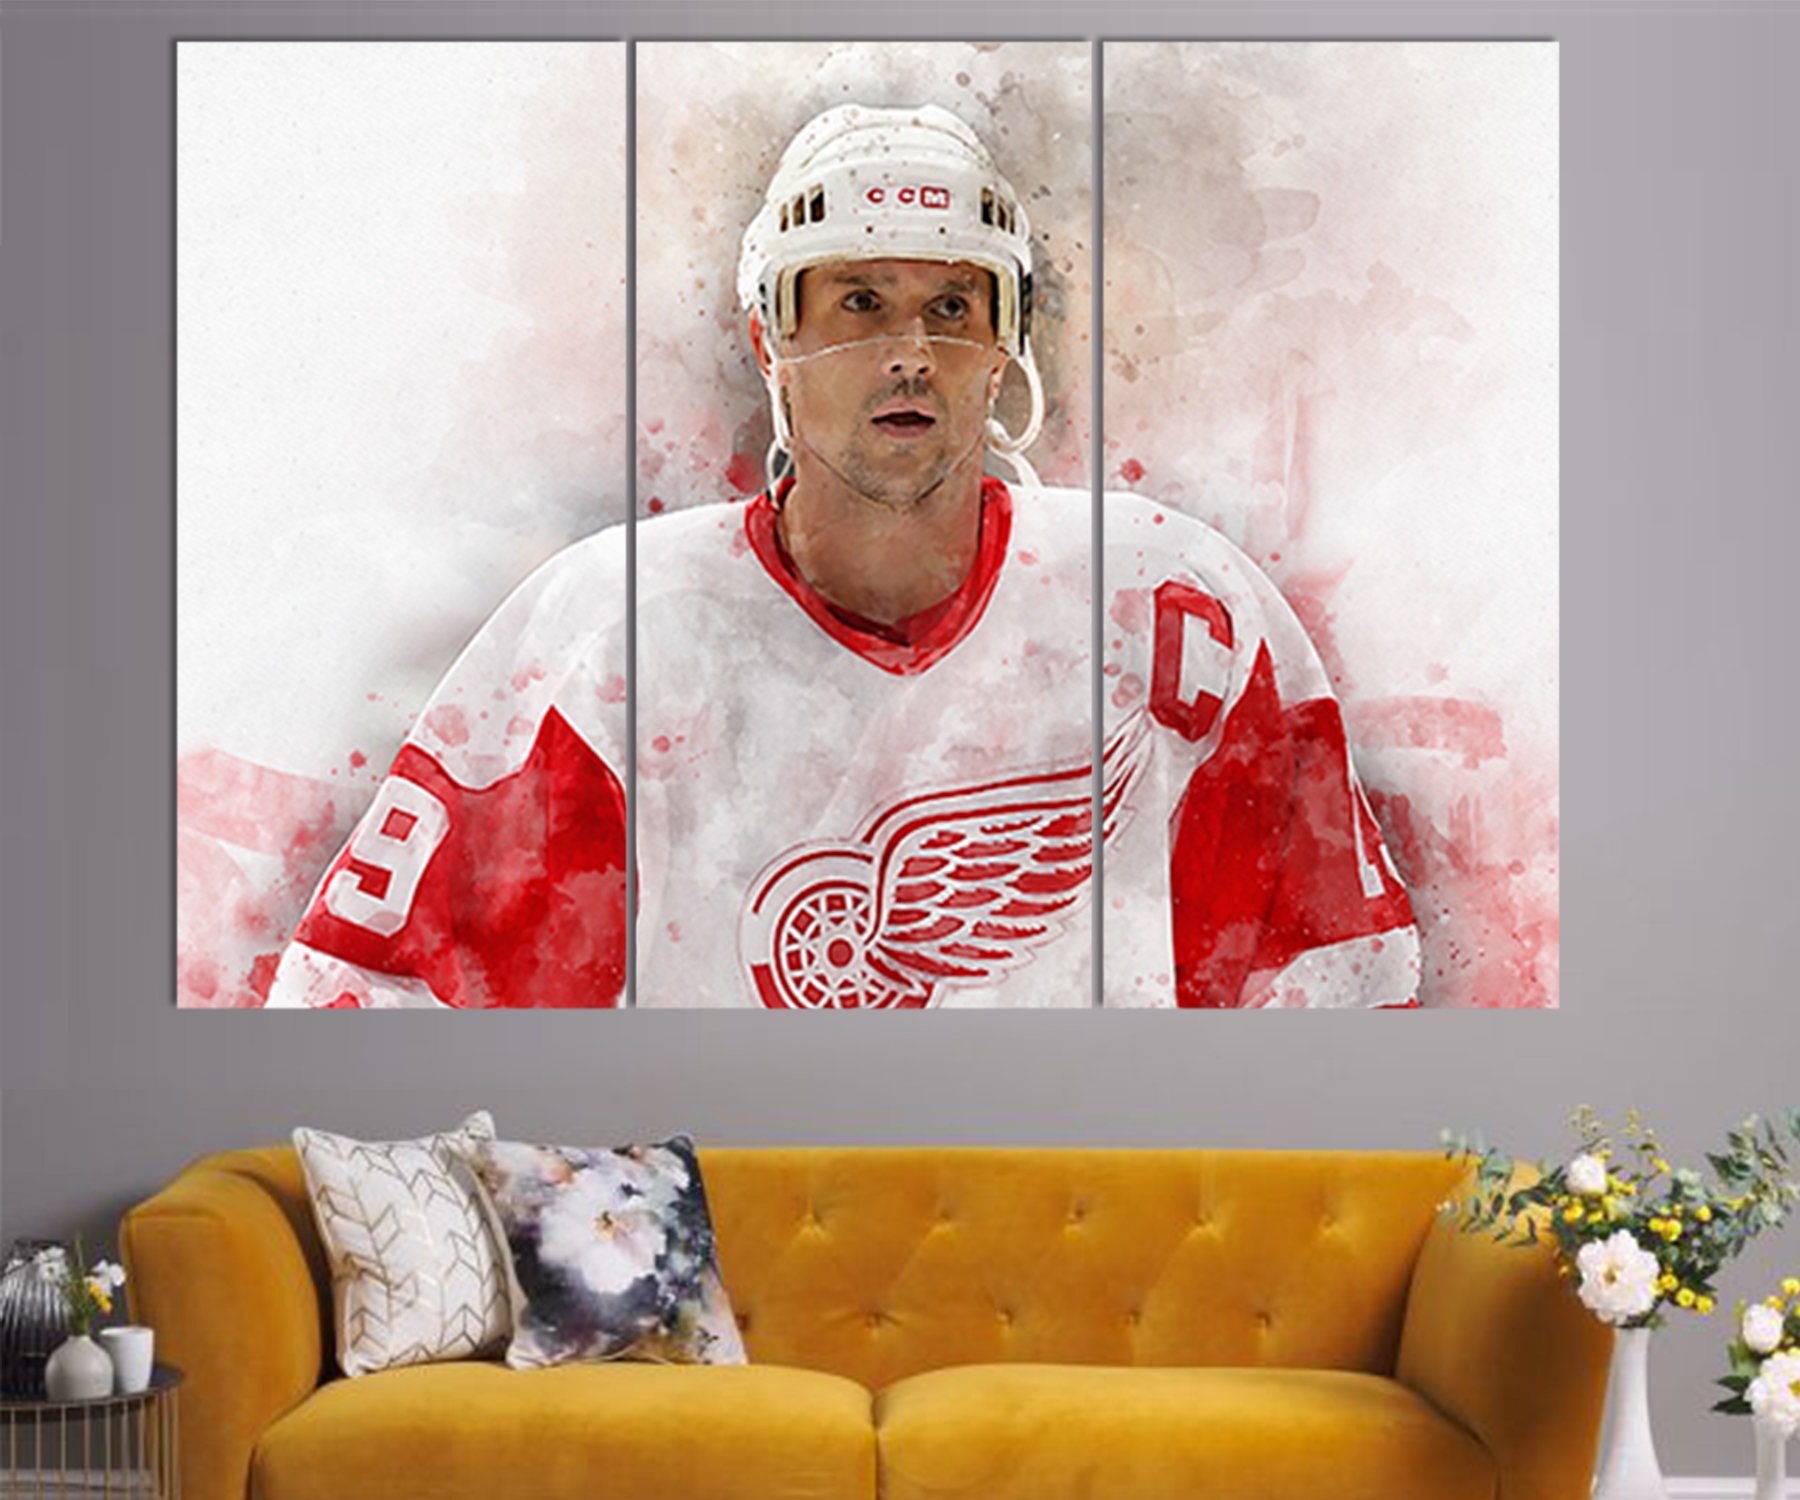 American Jewelry and Loan - Check out our signed Steve Yzerman